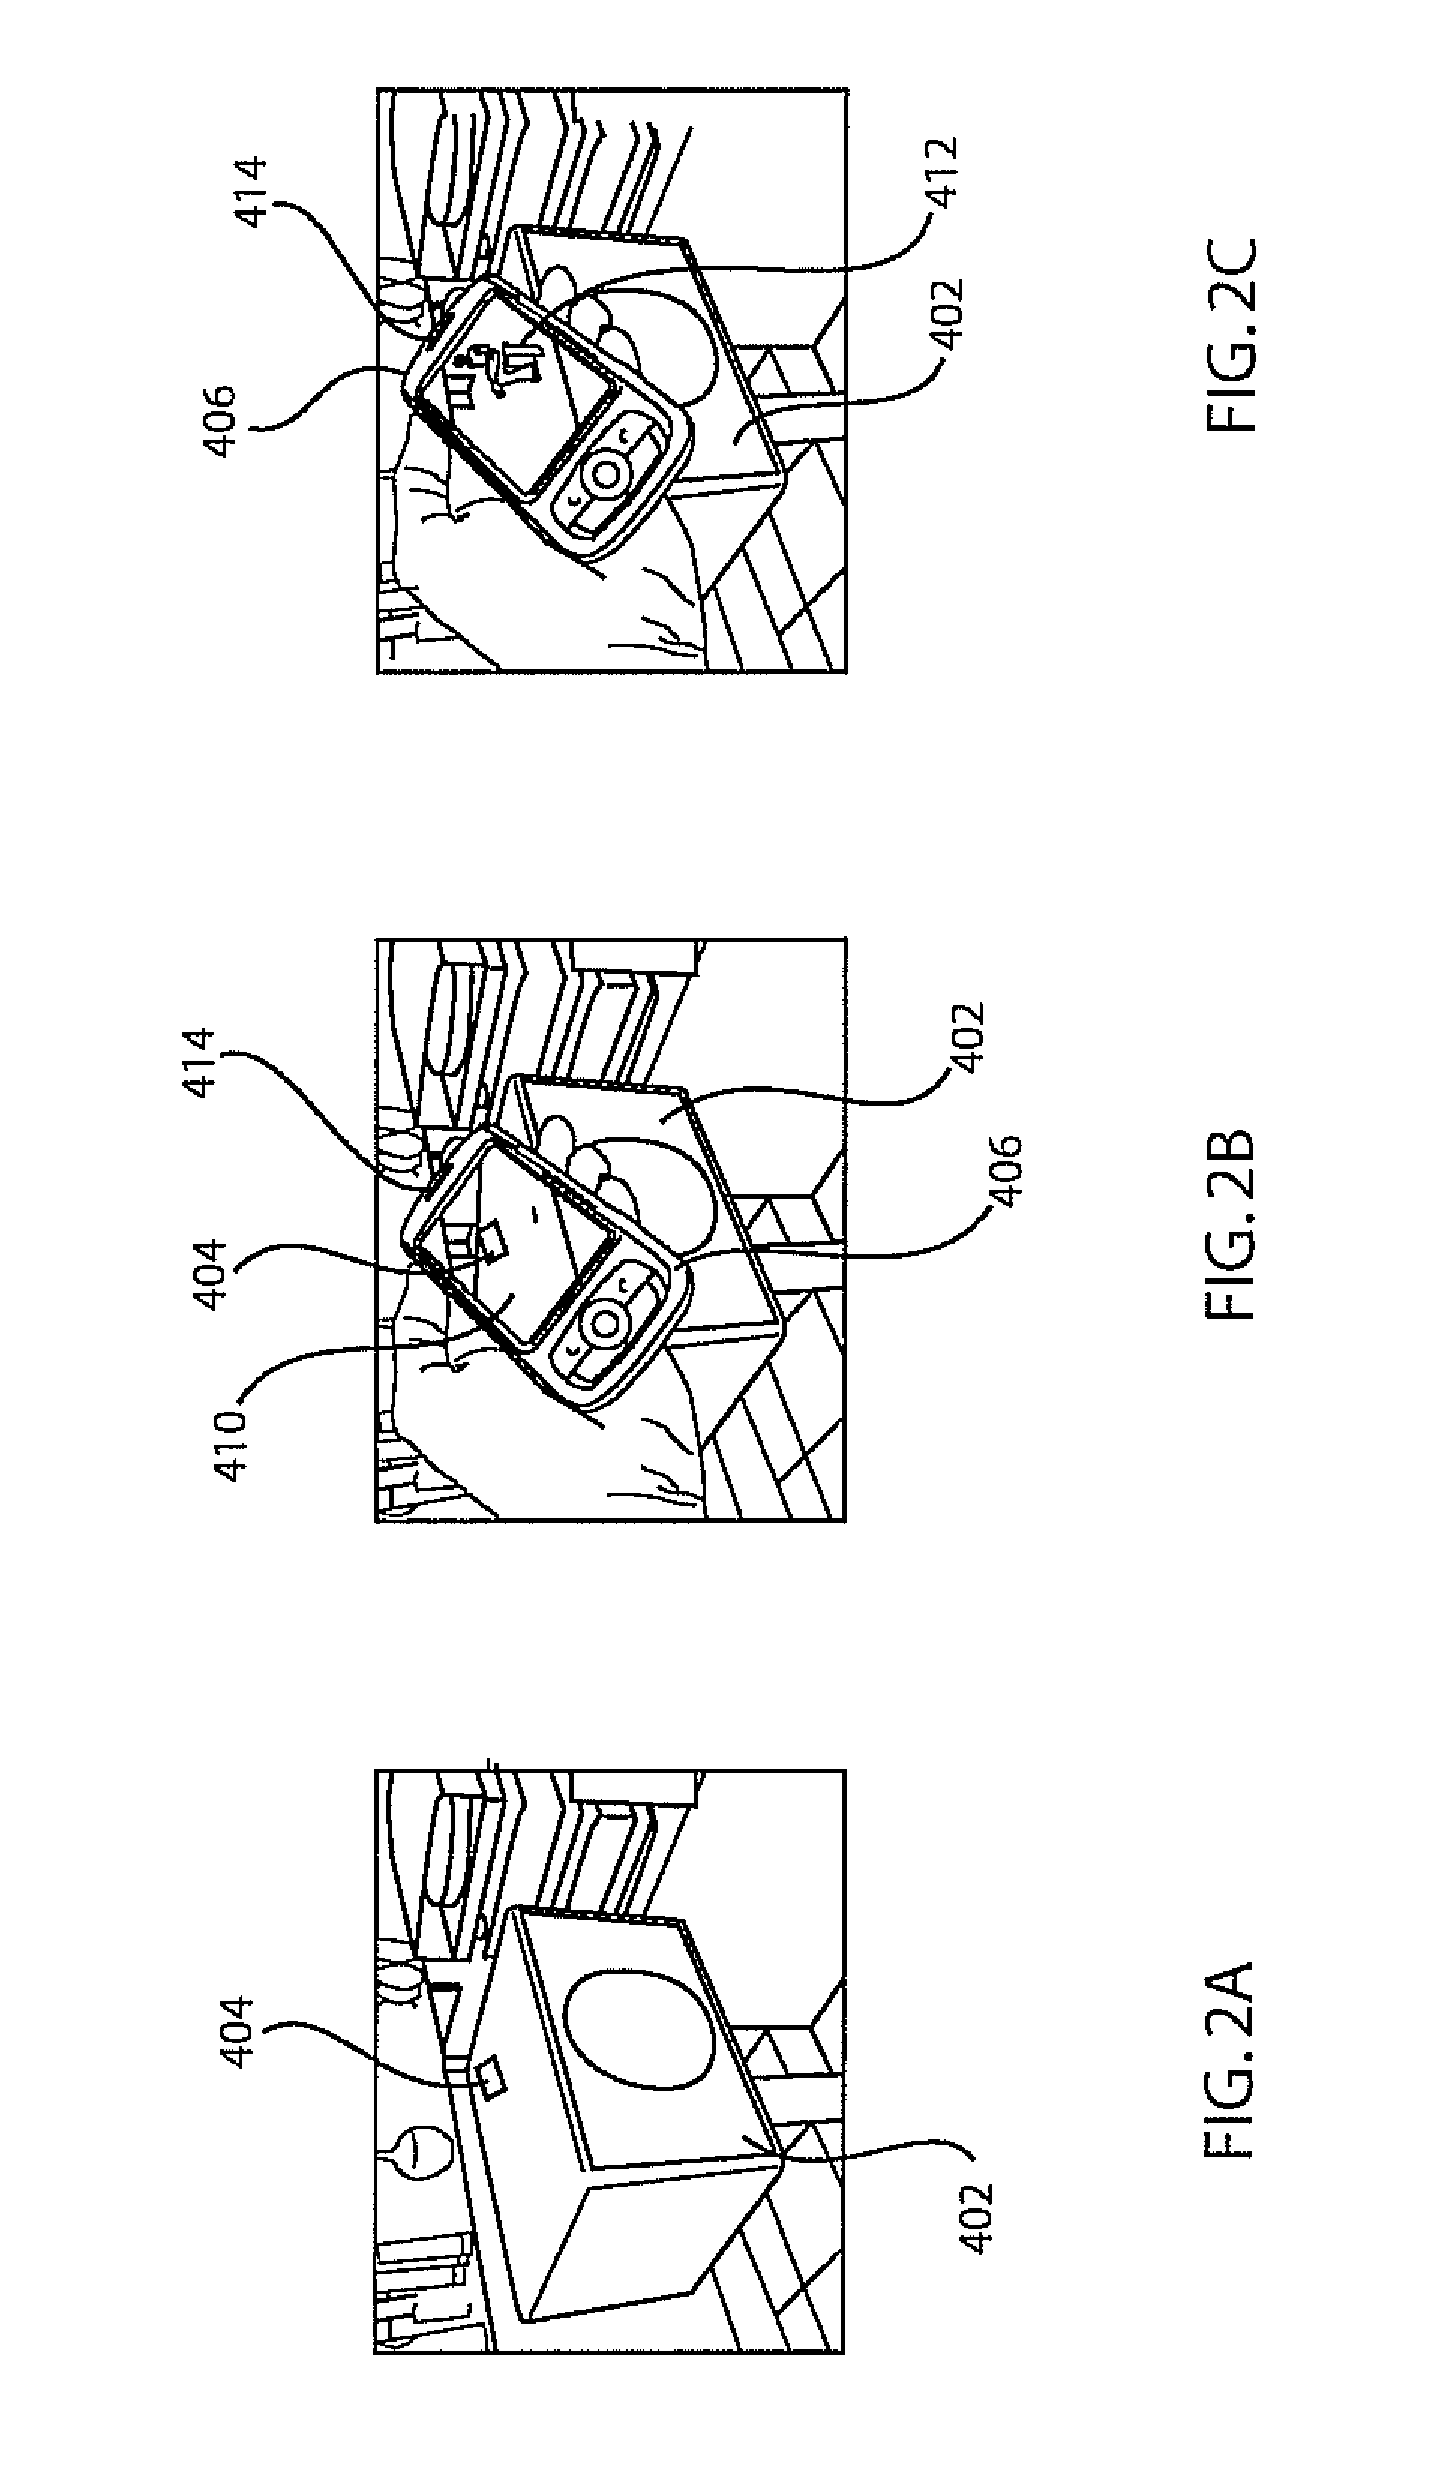 System and method for providing contemporaneous product information with animated virtual representations